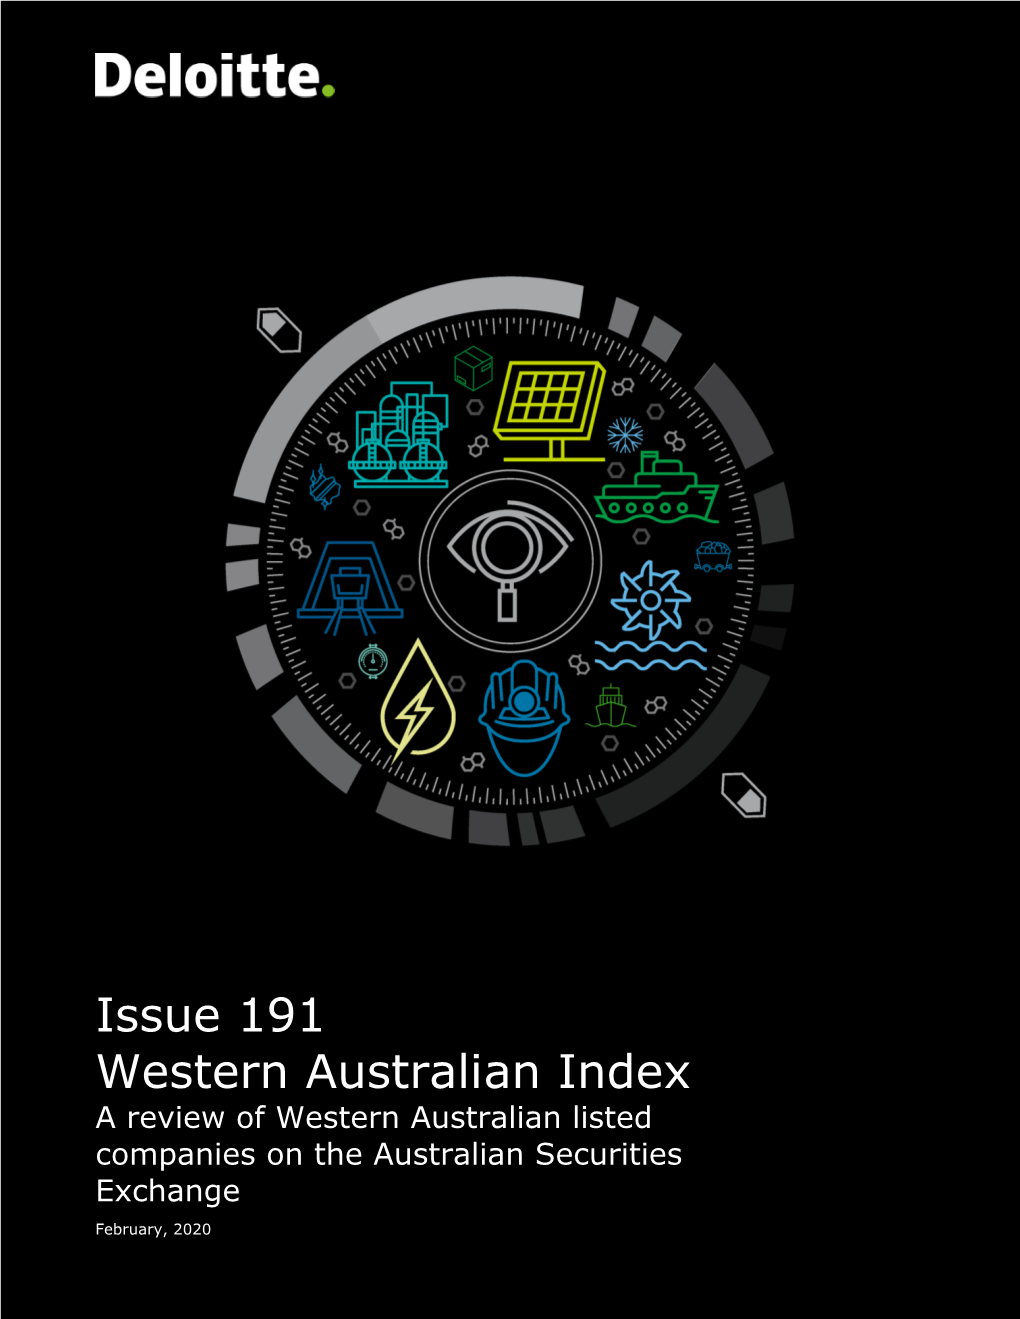 Issue 191 Western Australian Index a Review of Western Australian Listed Companies on the Australian Securities Exchange